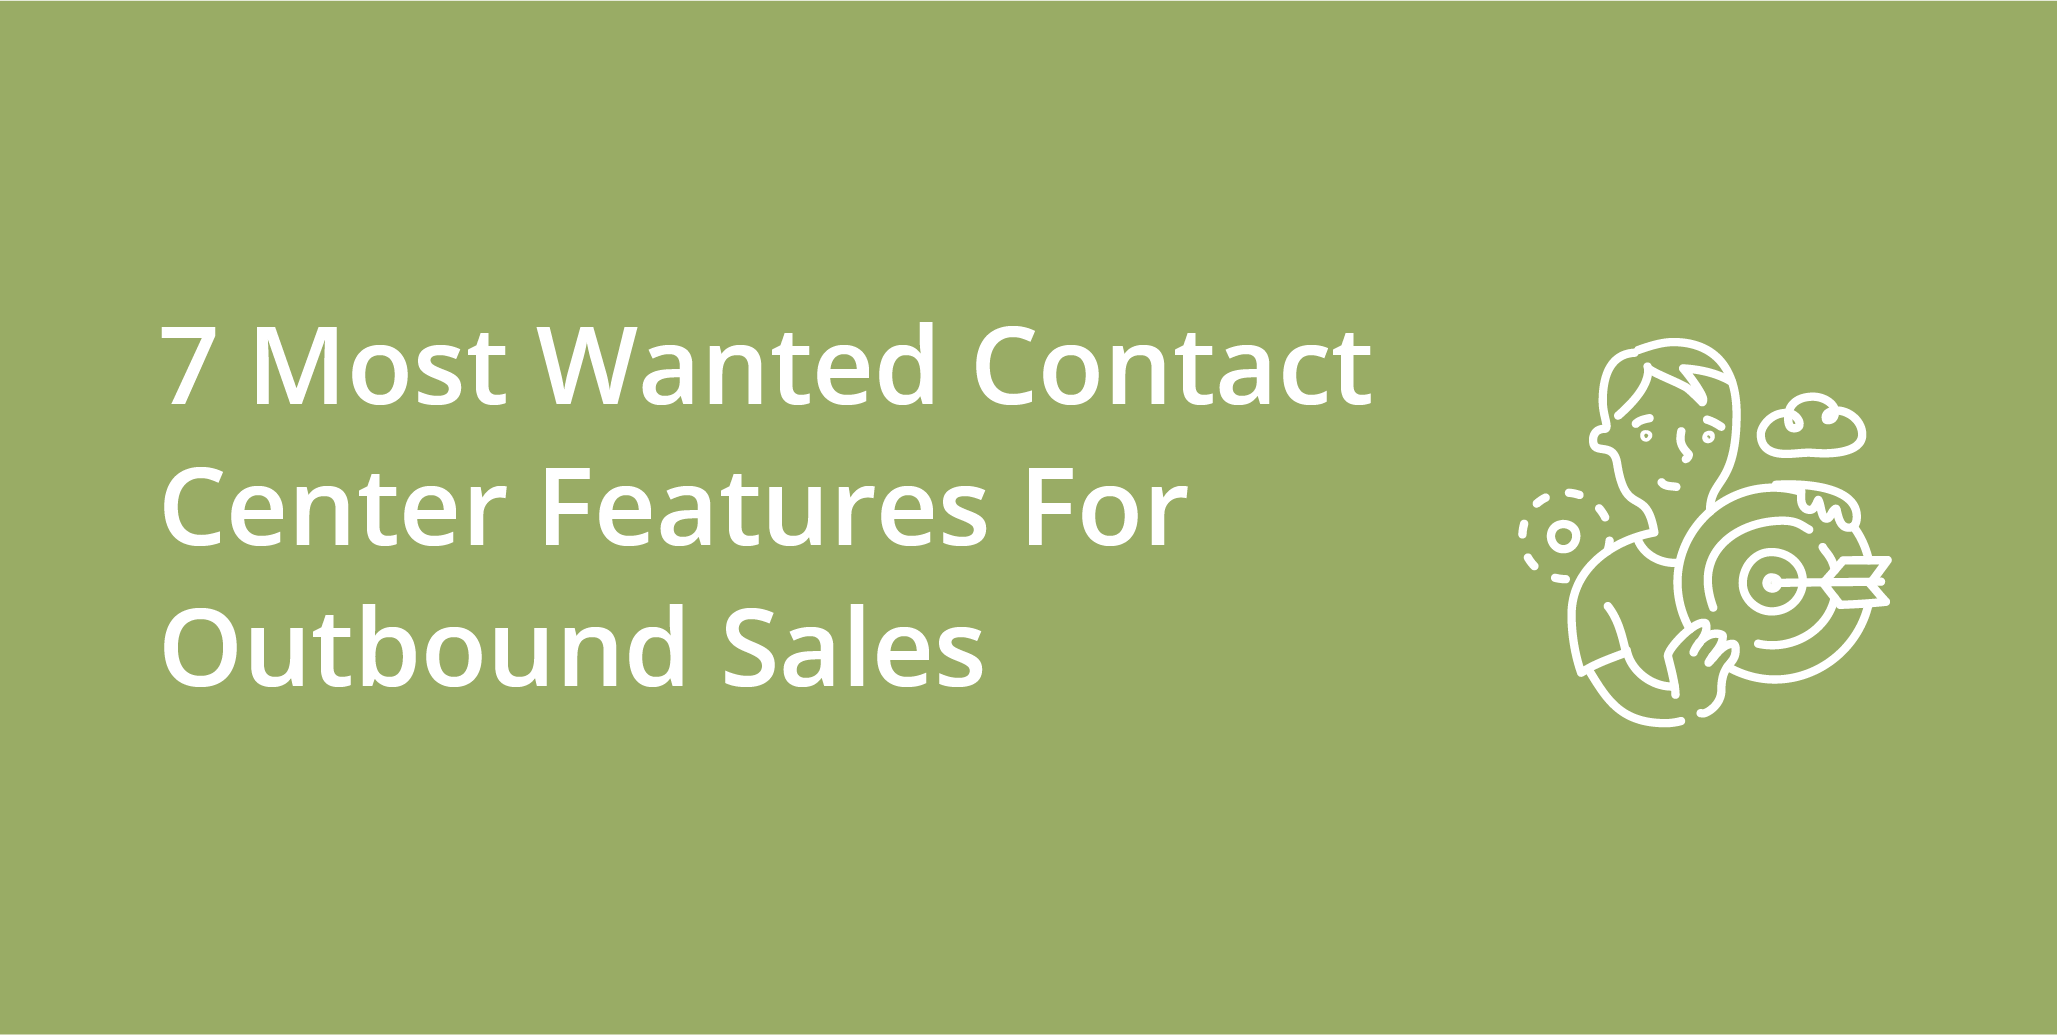 7 Most Wanted Contact Center Features For Outbound Sales